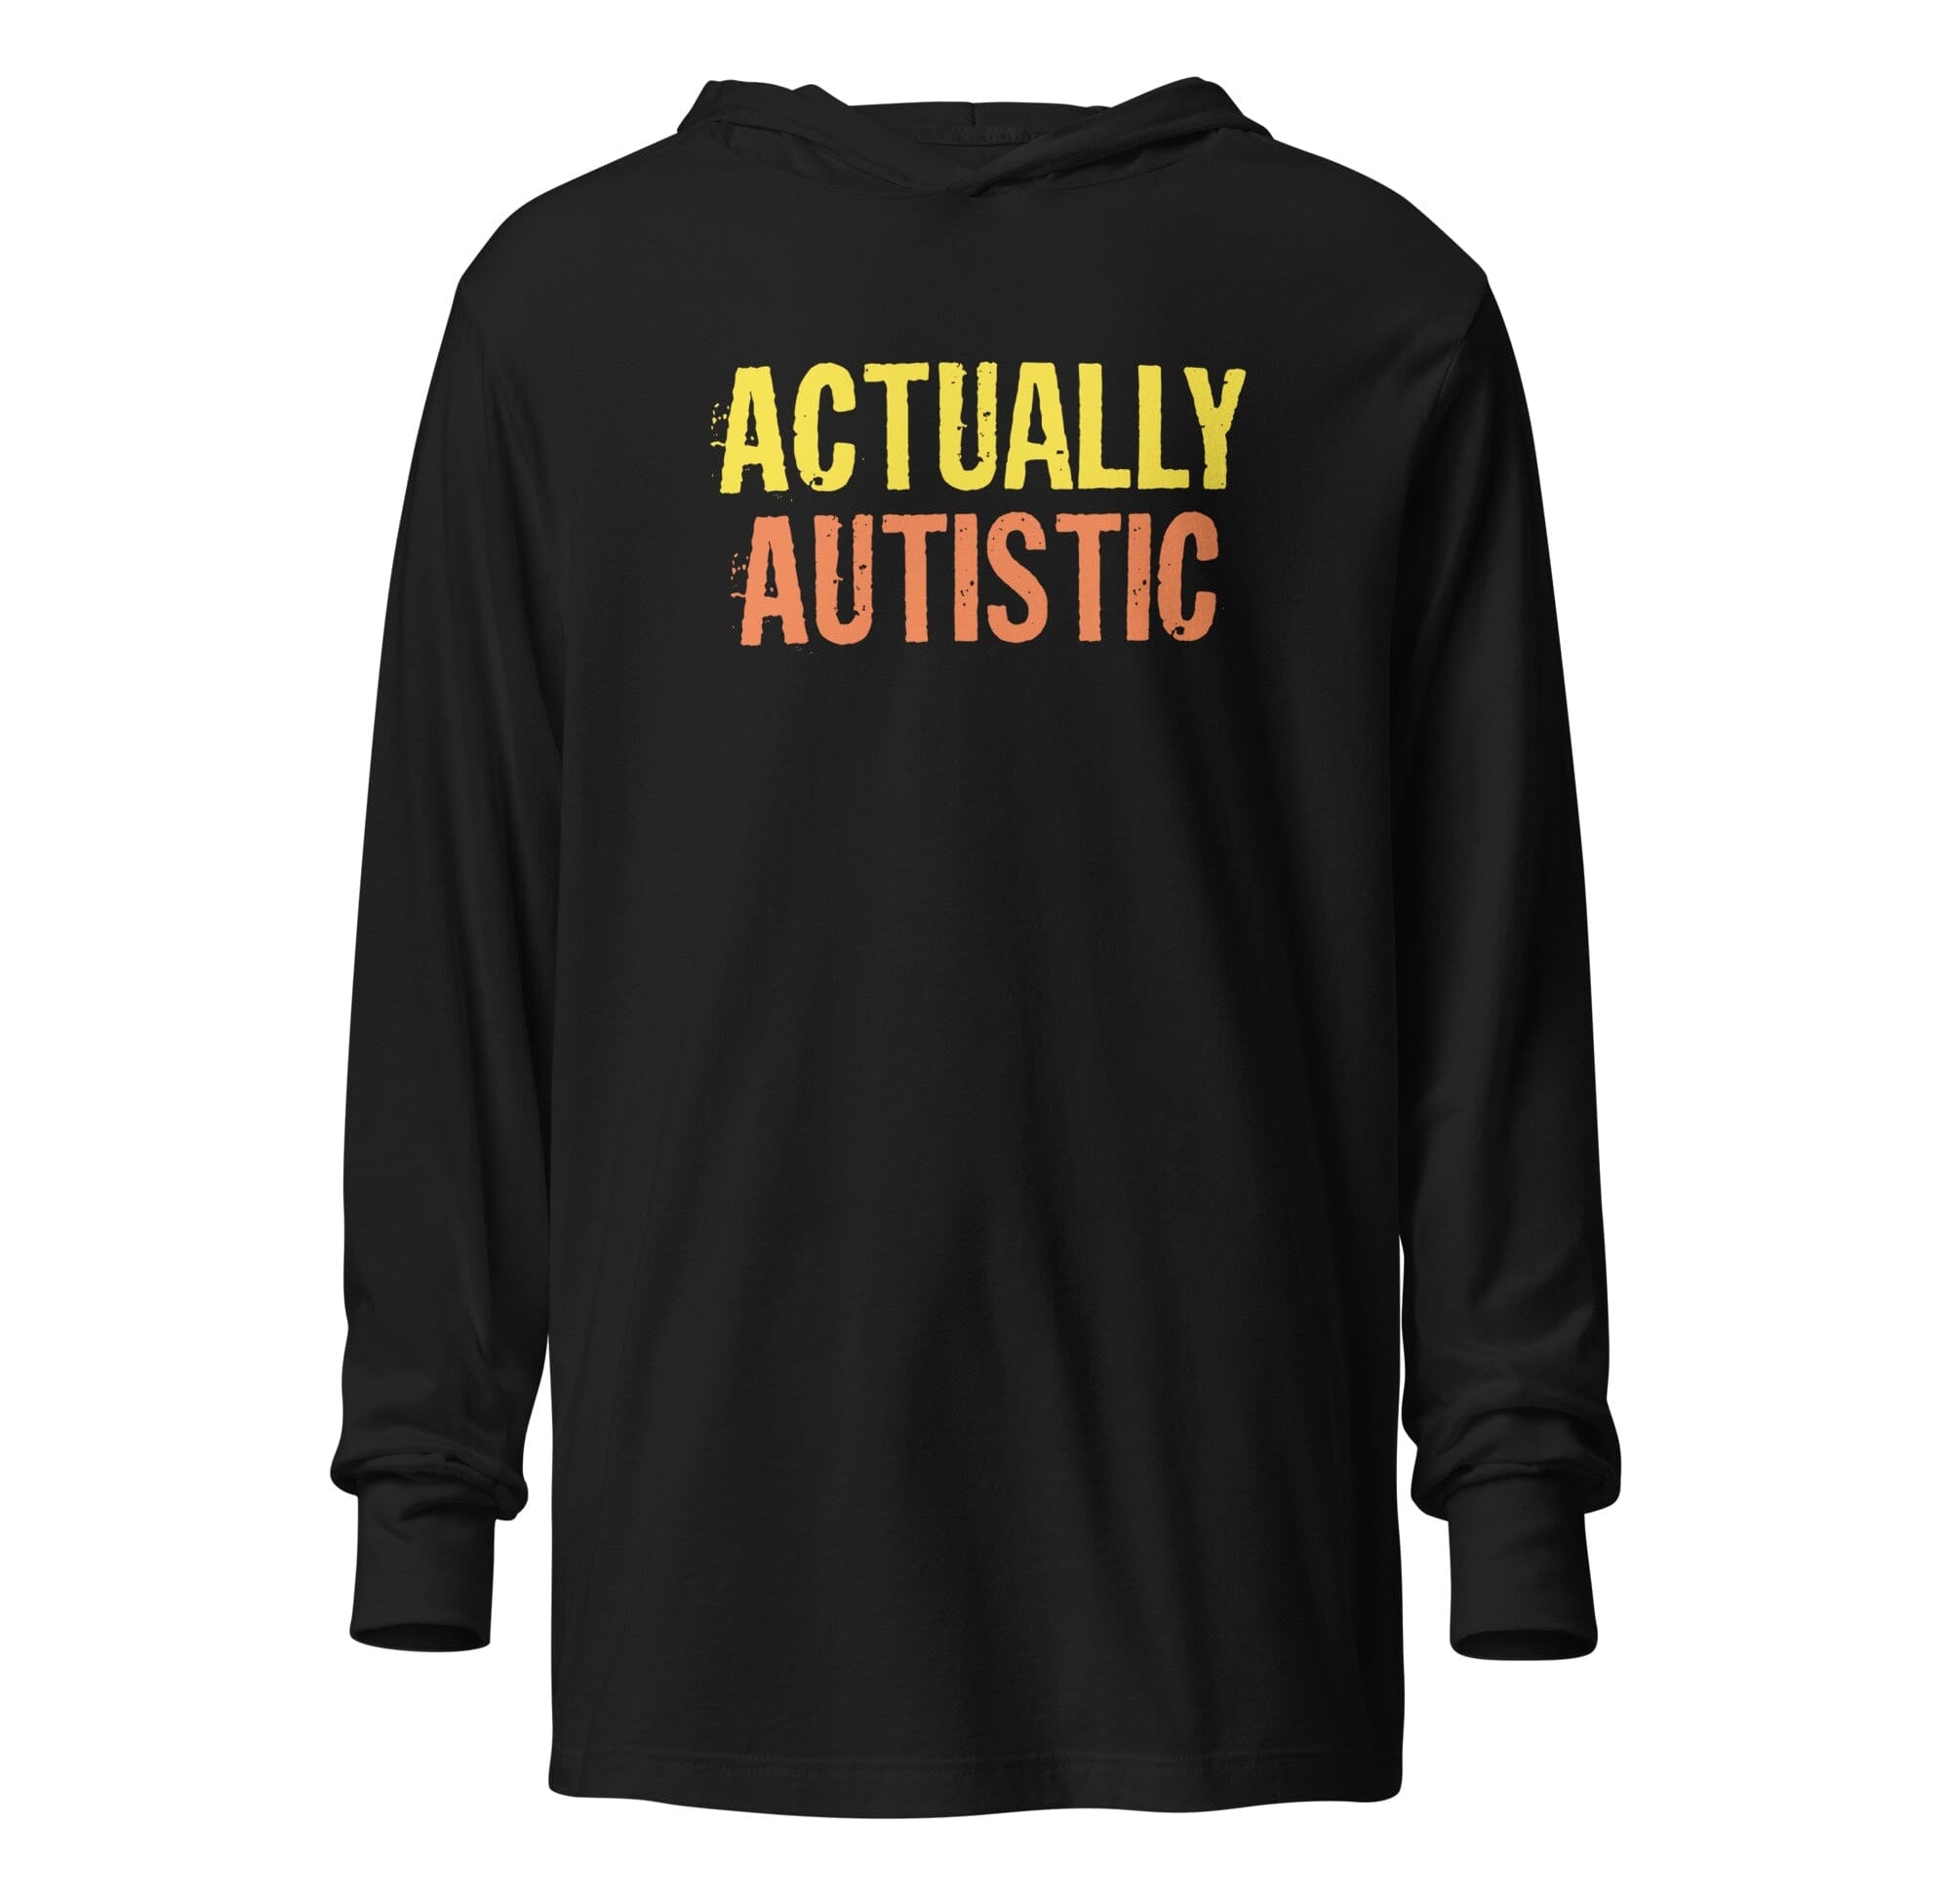 Actually Autistic Unisex Hooded long-sleeve tee The Autistic Innovator Black XS 